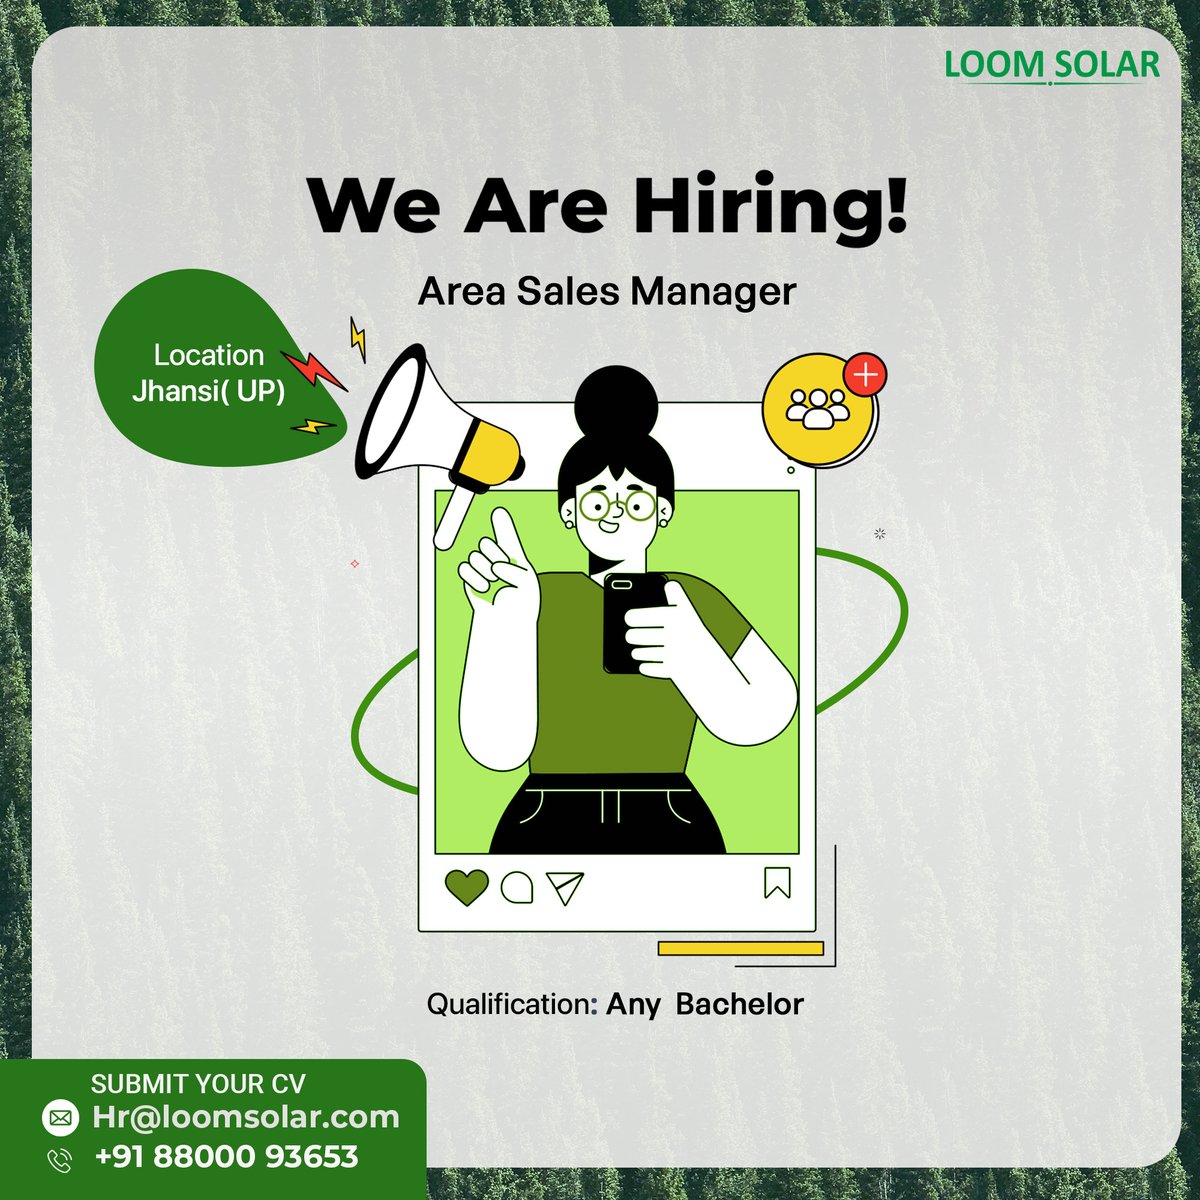 Join Our Amazing Team! As an Area Sales Manager at location Jhansi. Any graduate can apply for this post. How to apply: Interested professionals can send their updated CVs to Hr@loomsolar.com at +91-8800093653.
.
.
#HiringNow #jobs #search #hire #hiring #successtip